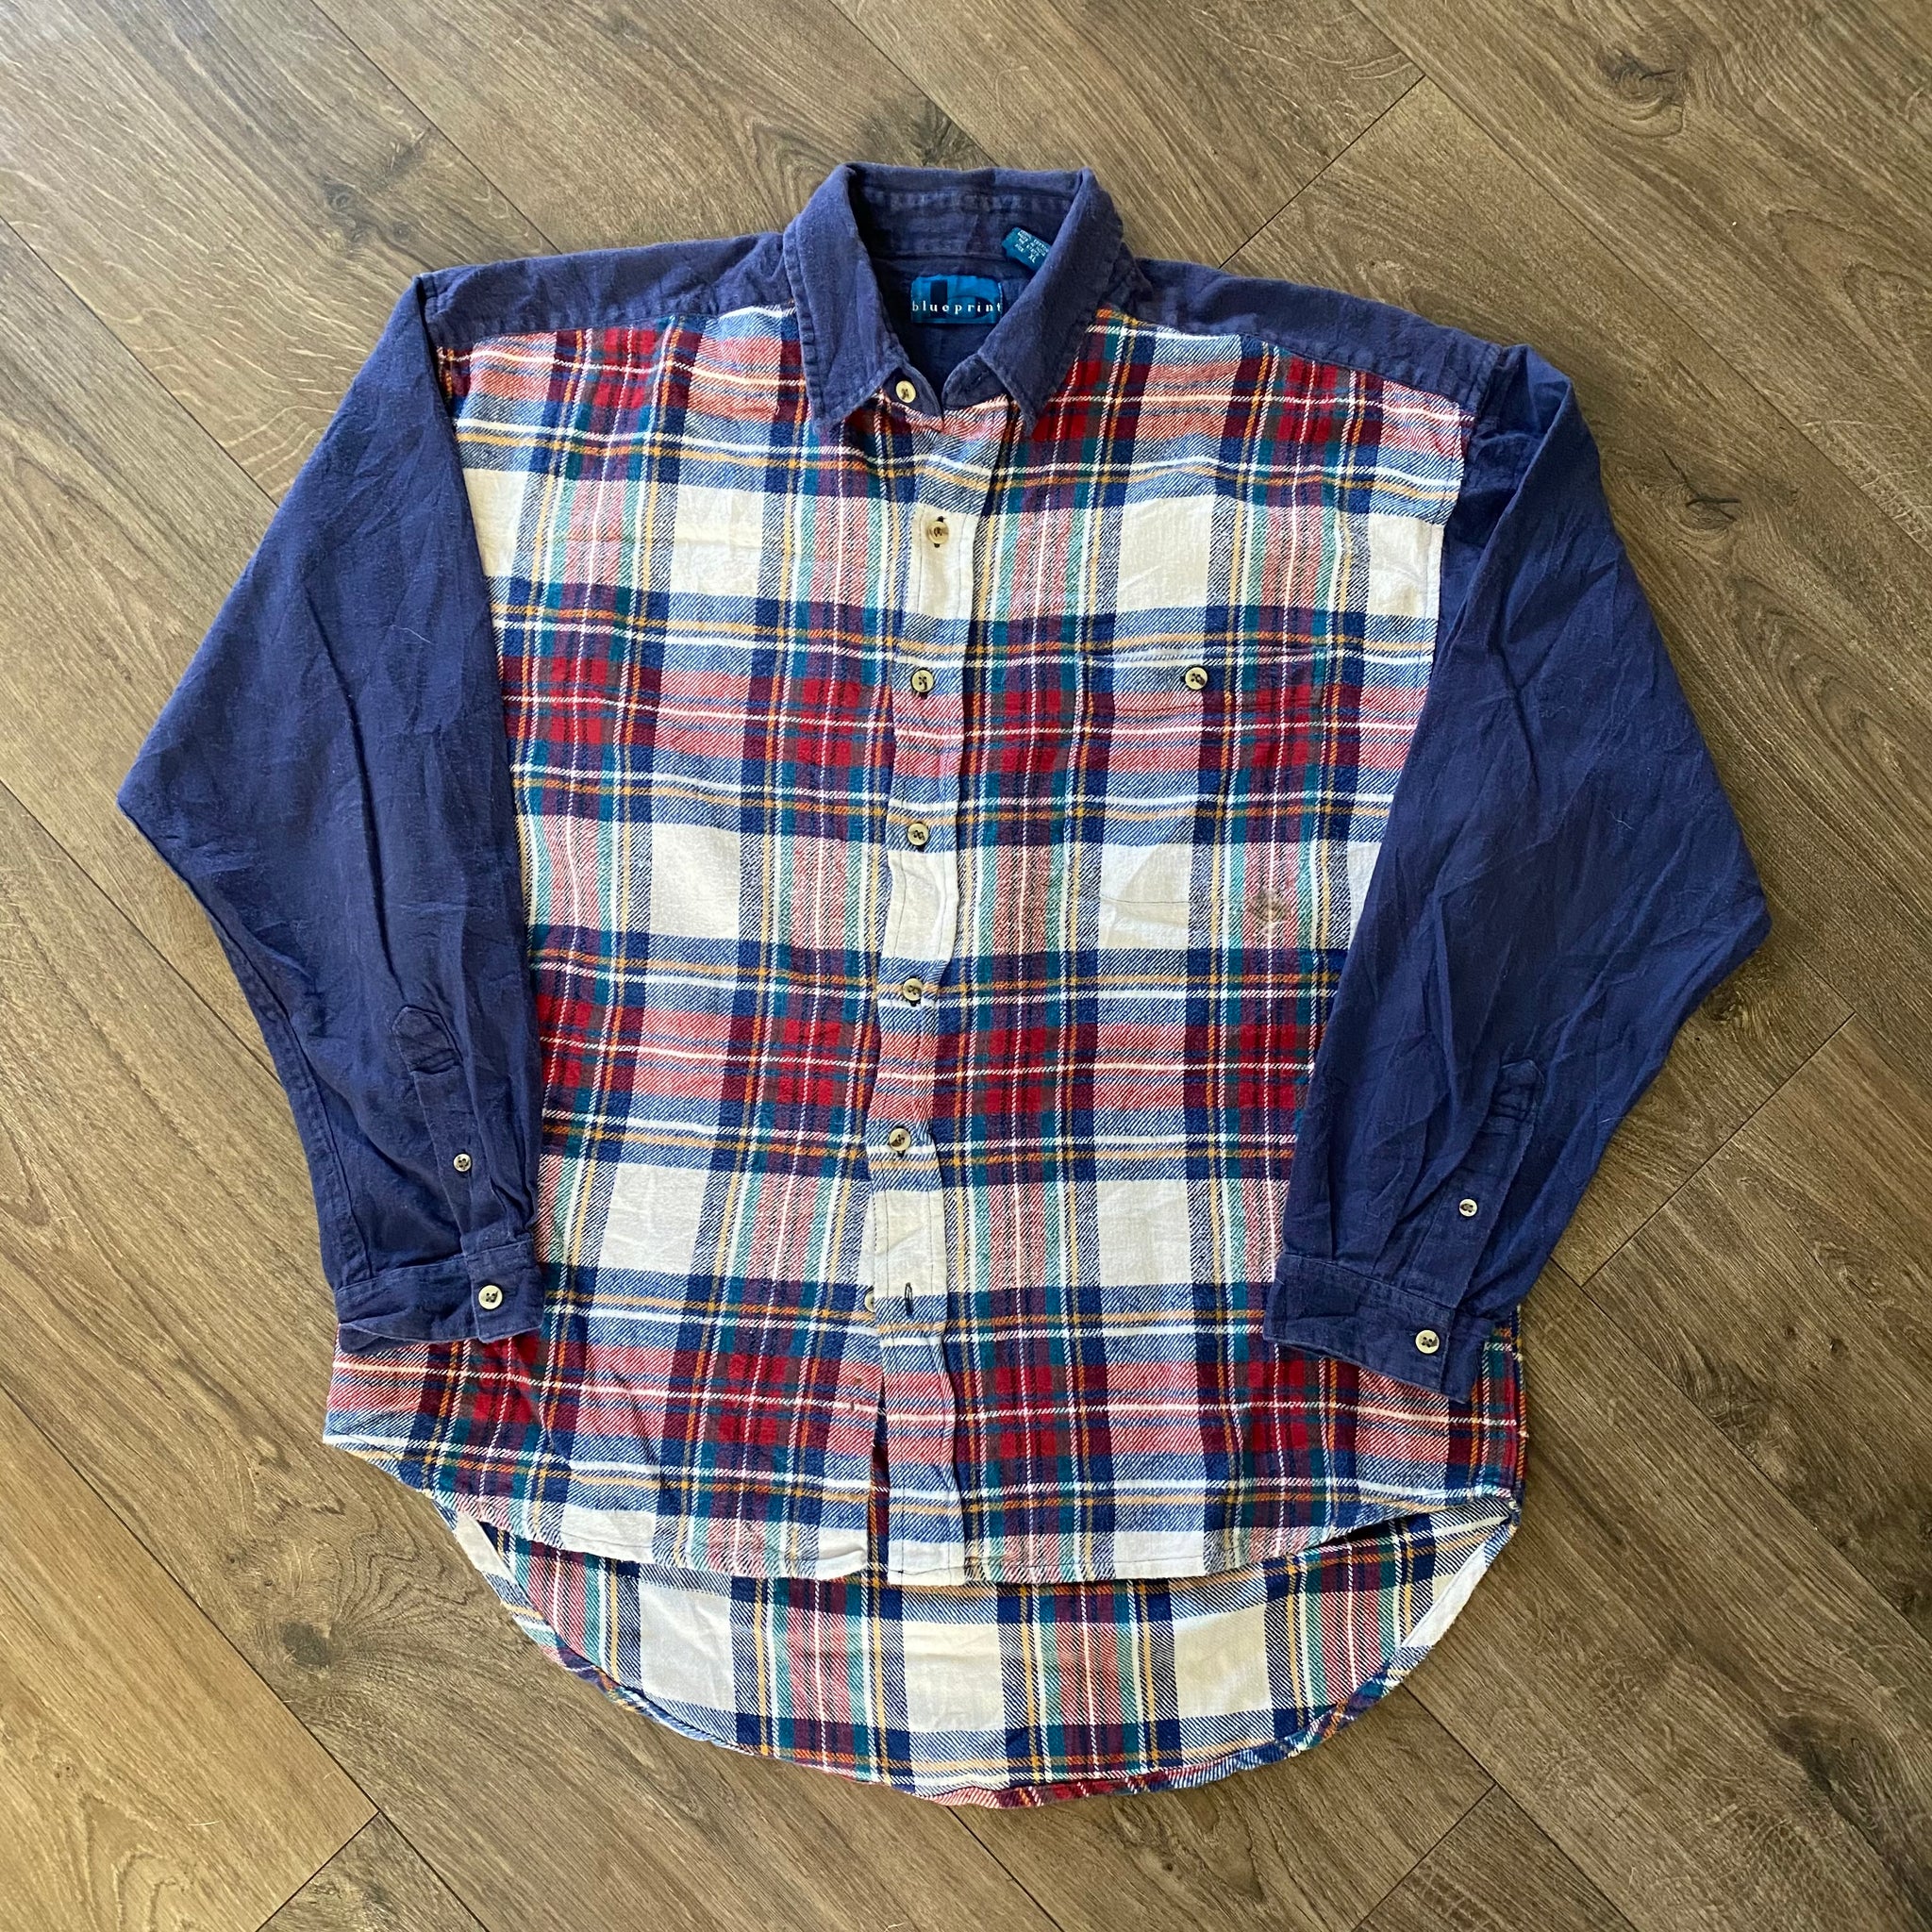 Vintage Plaid Flannel Checkered Over Shirt